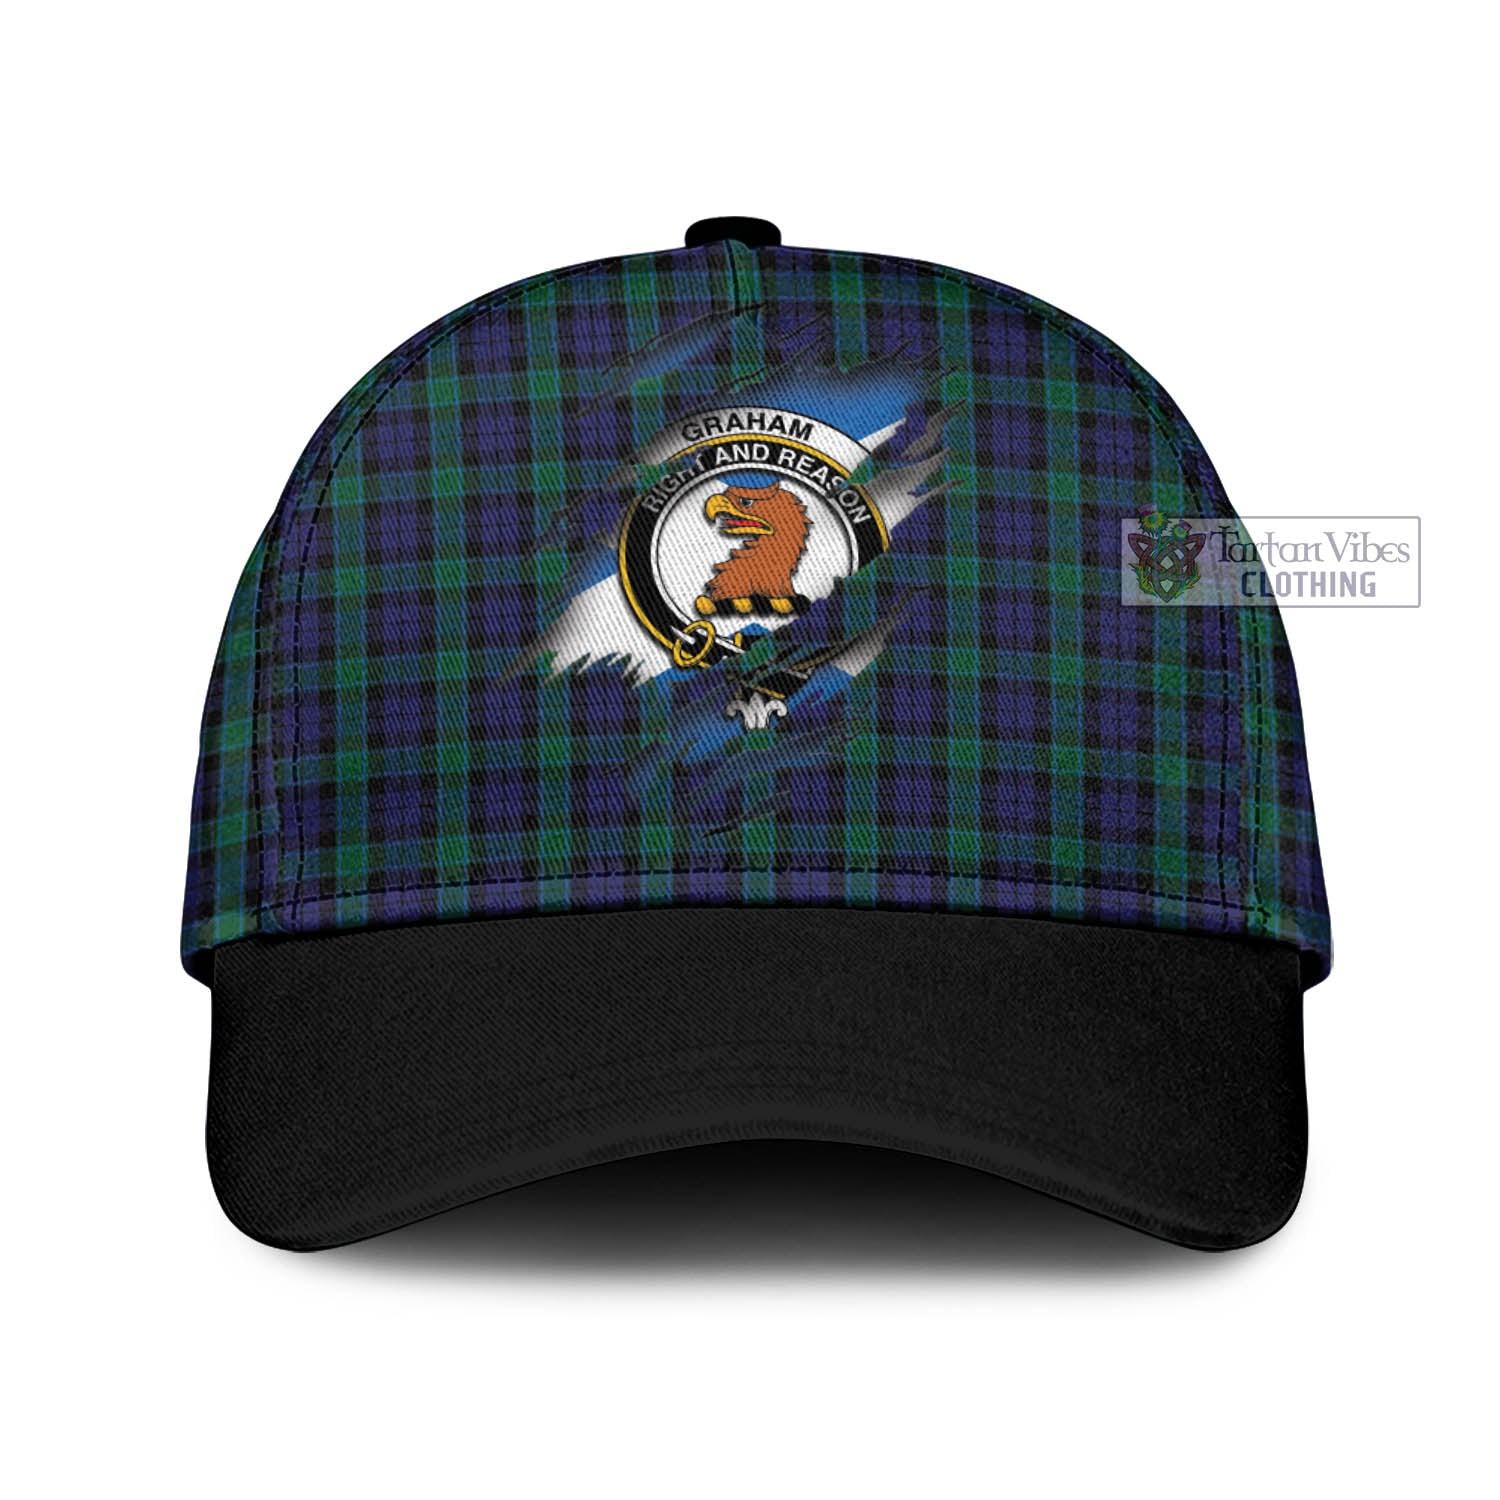 Tartan Vibes Clothing Graham of Menteith Tartan Classic Cap with Family Crest In Me Style